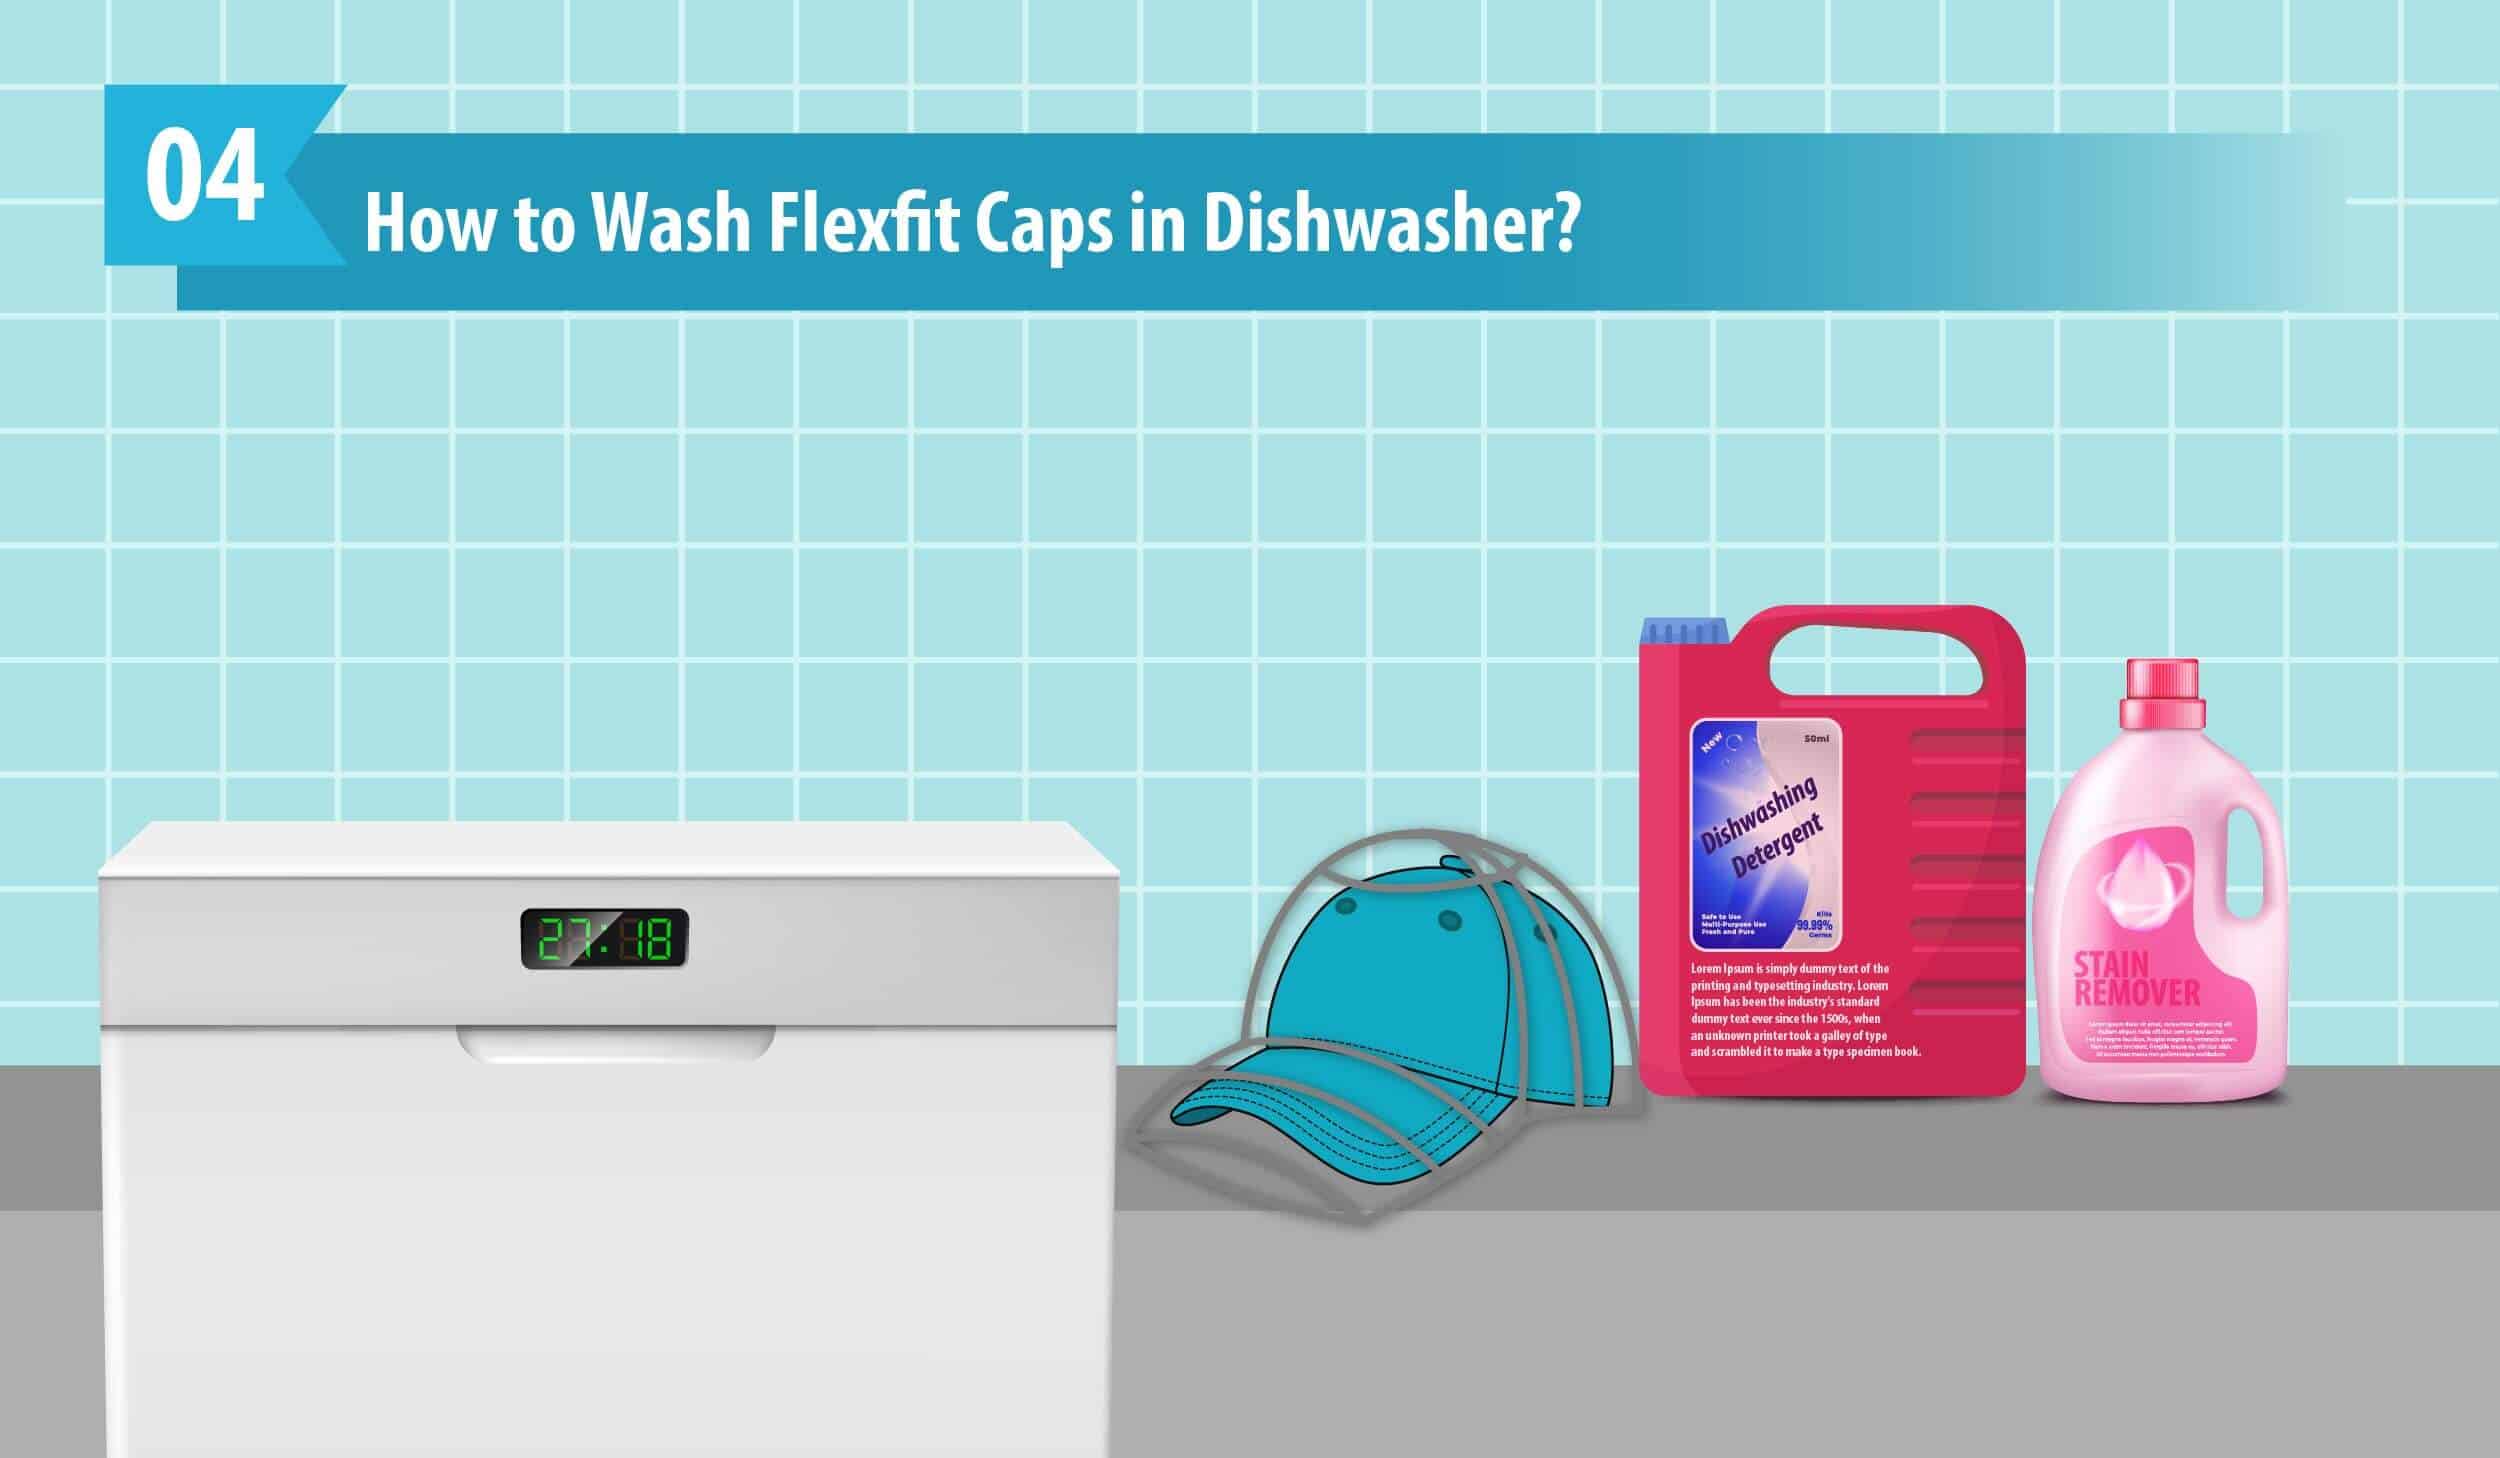 How to Wash Flexfit Caps in Dishwasher